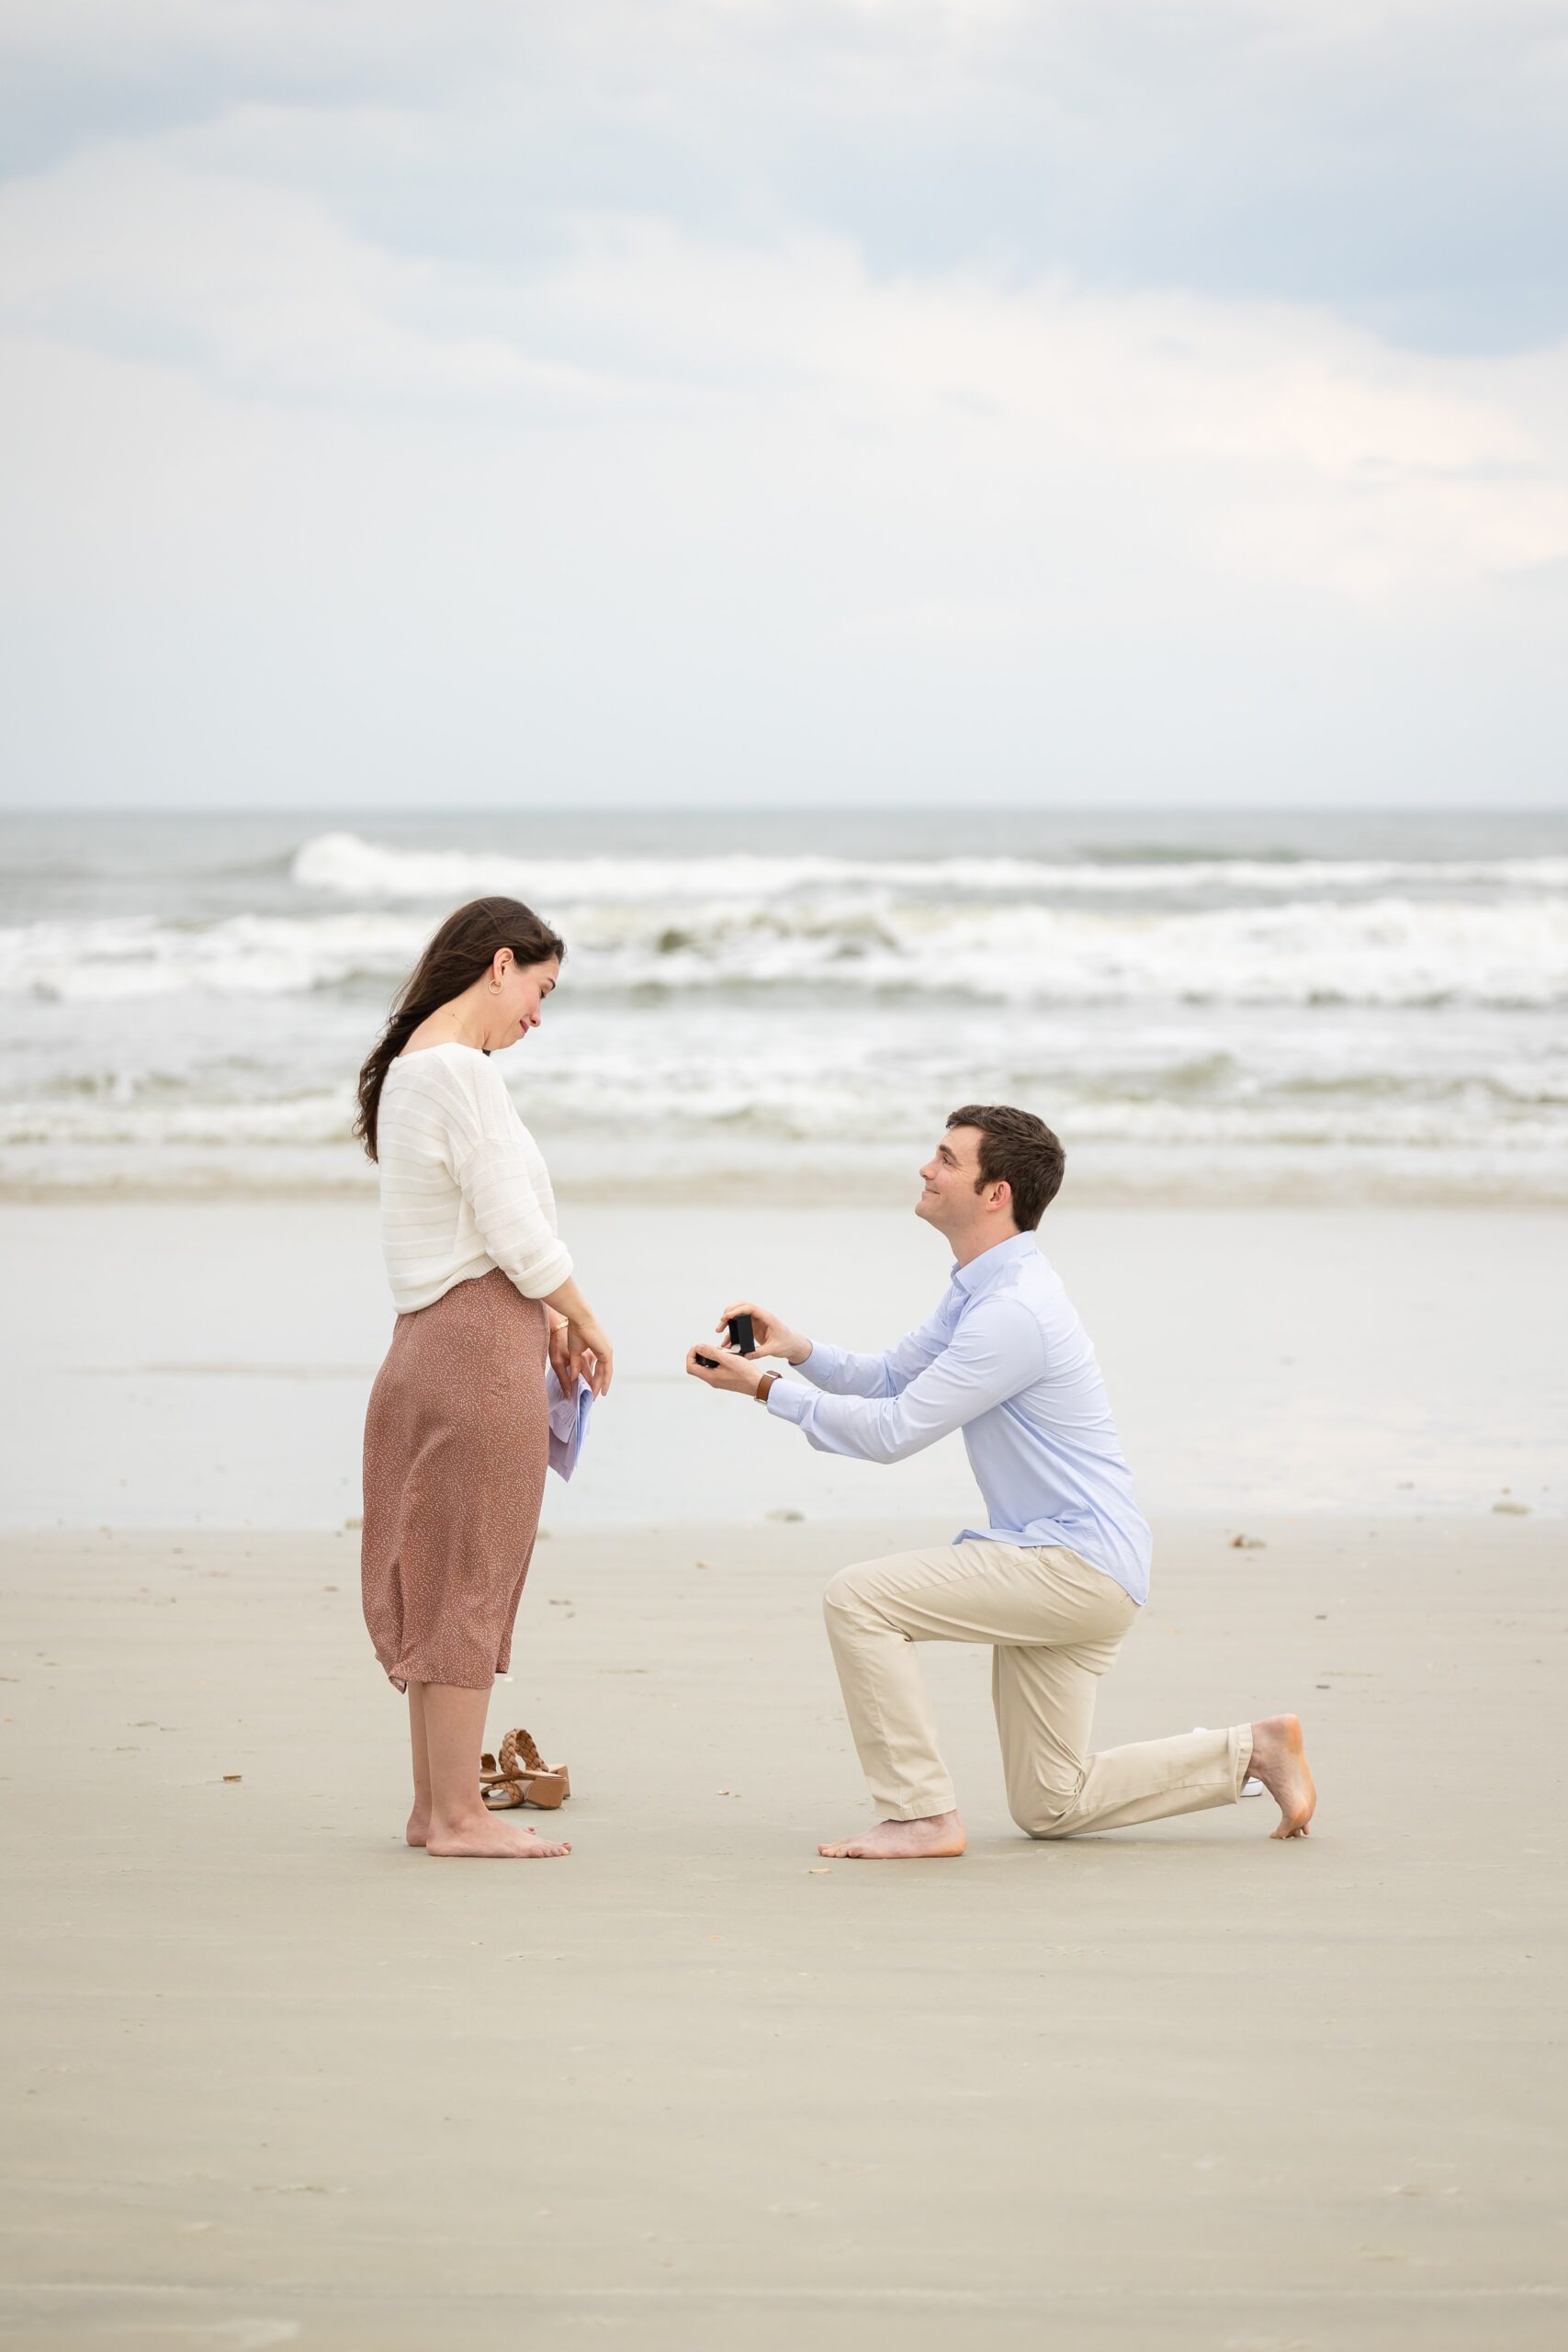 Proposal Photography on St. Augustine Beach by St. Augustine Photographer, Phavy Photography